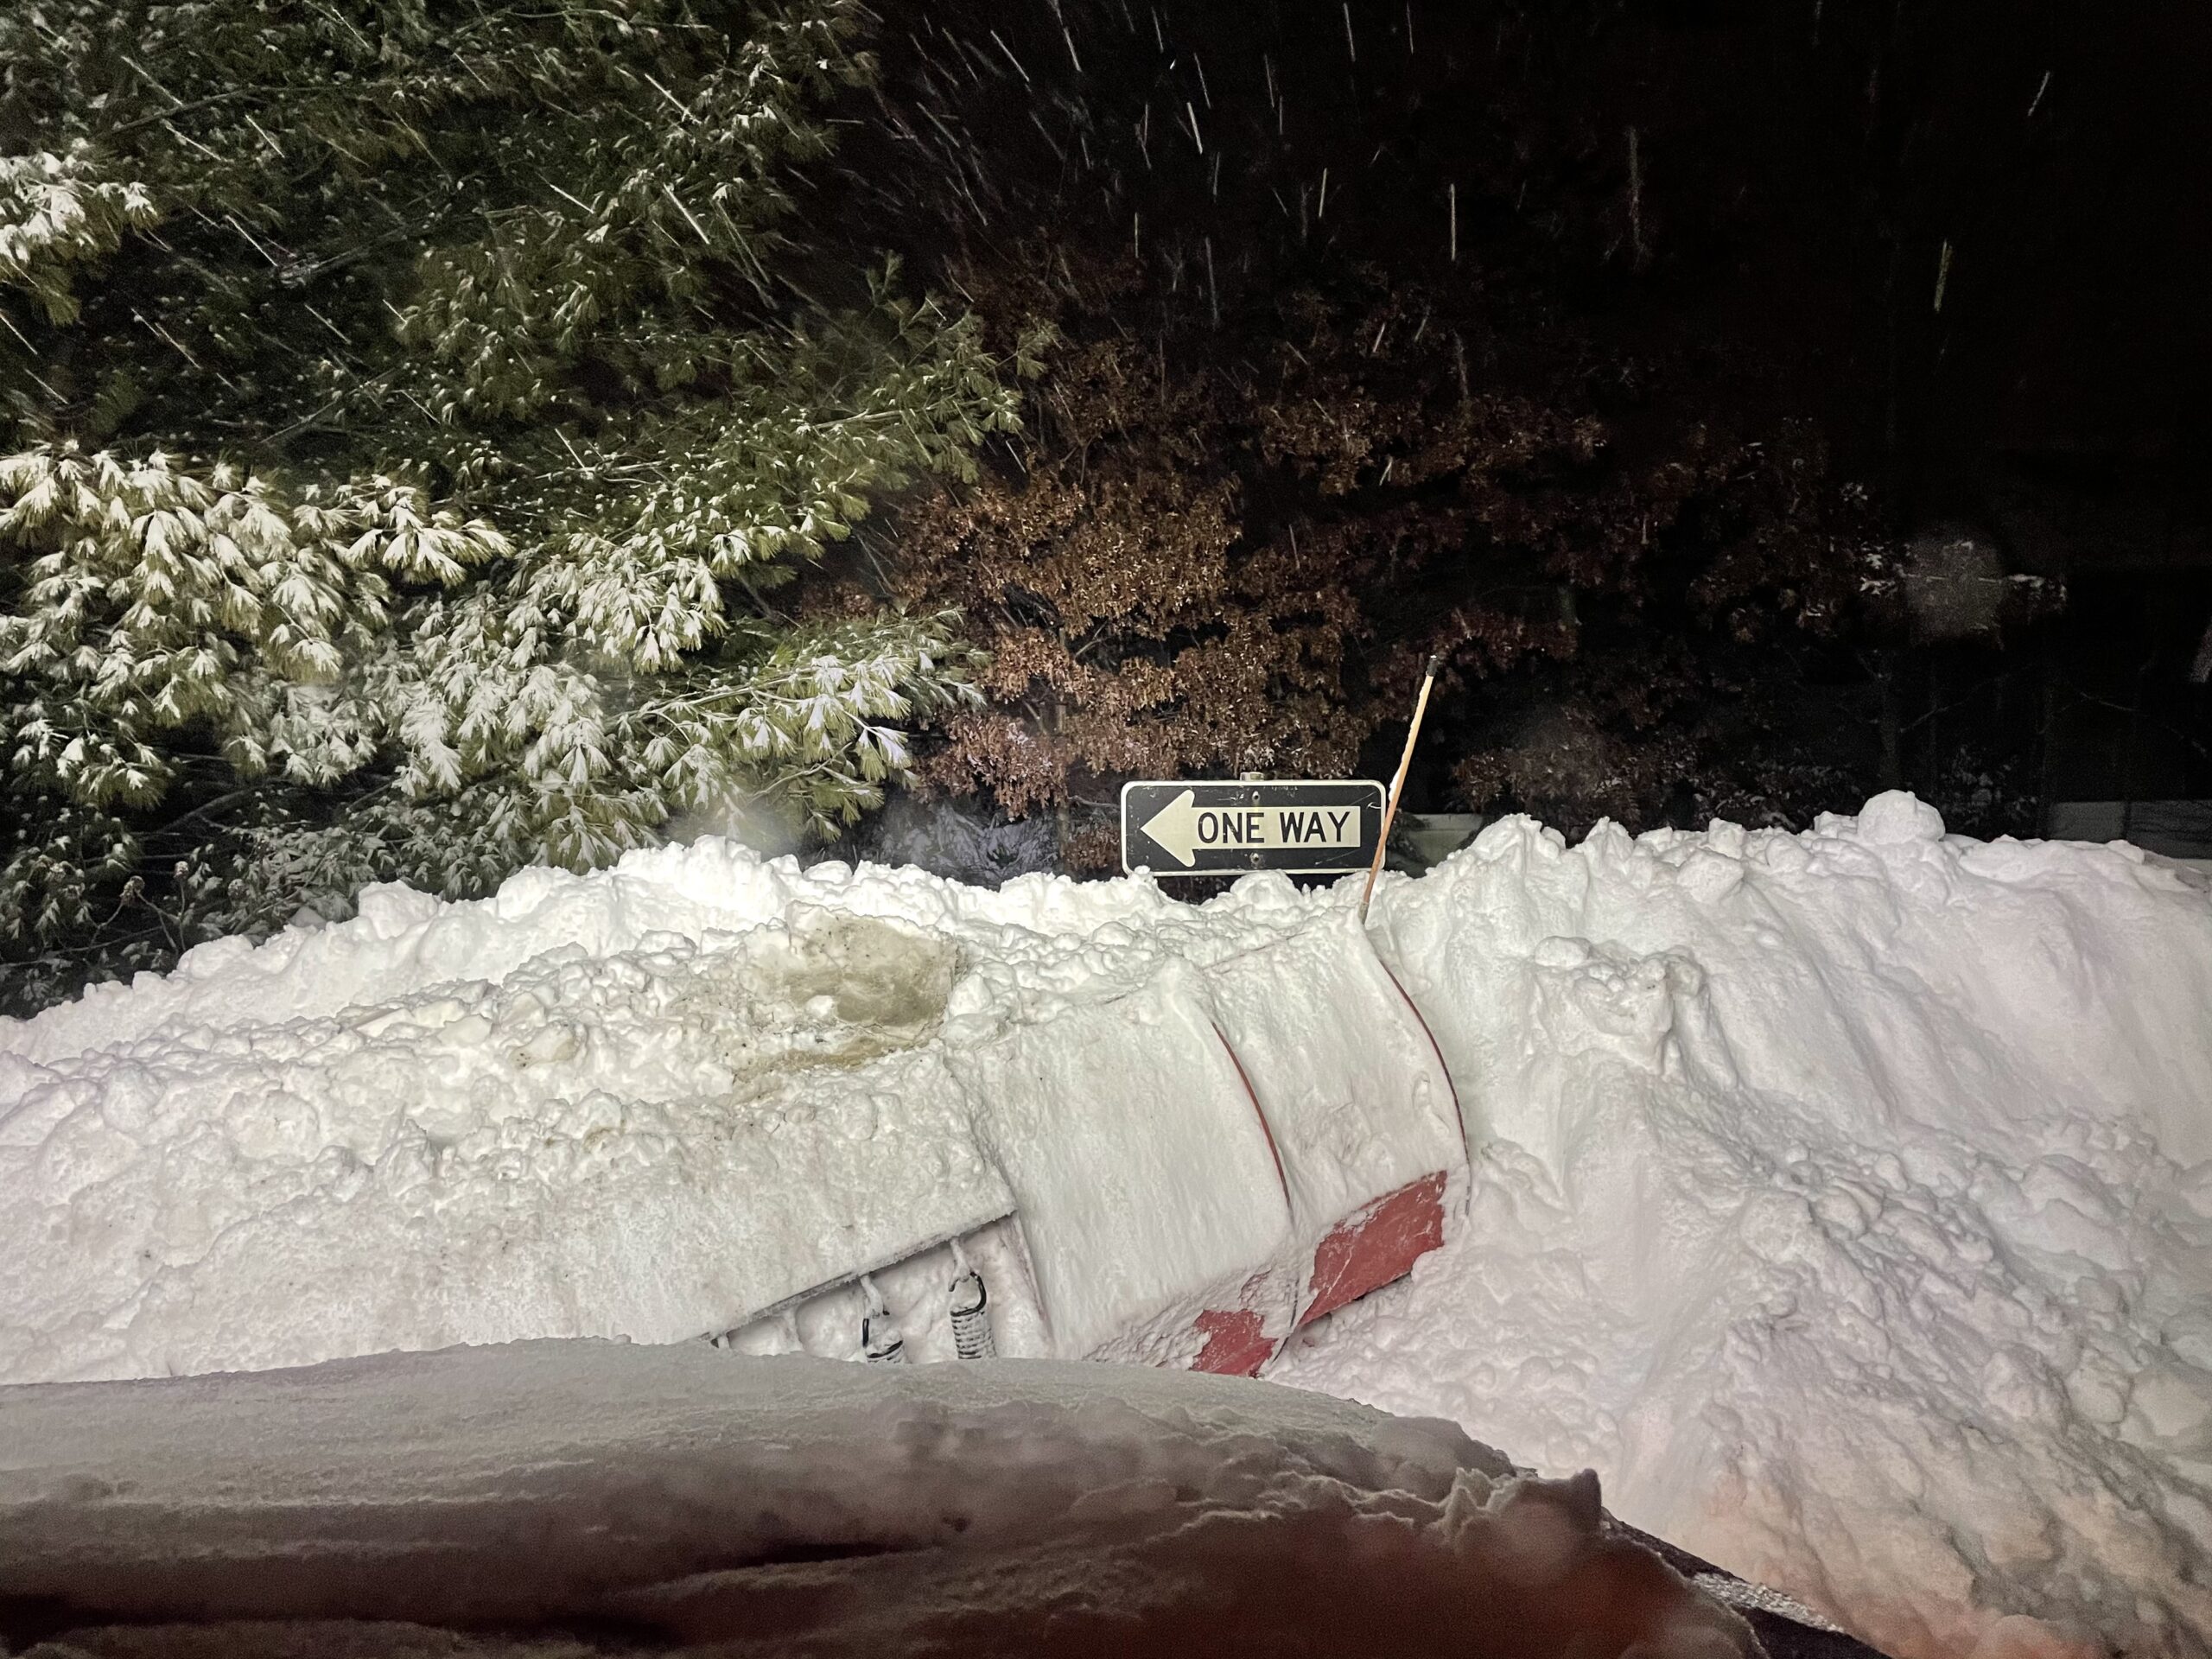 snow_removal_central_jersey_one_way_sign_parking_lot